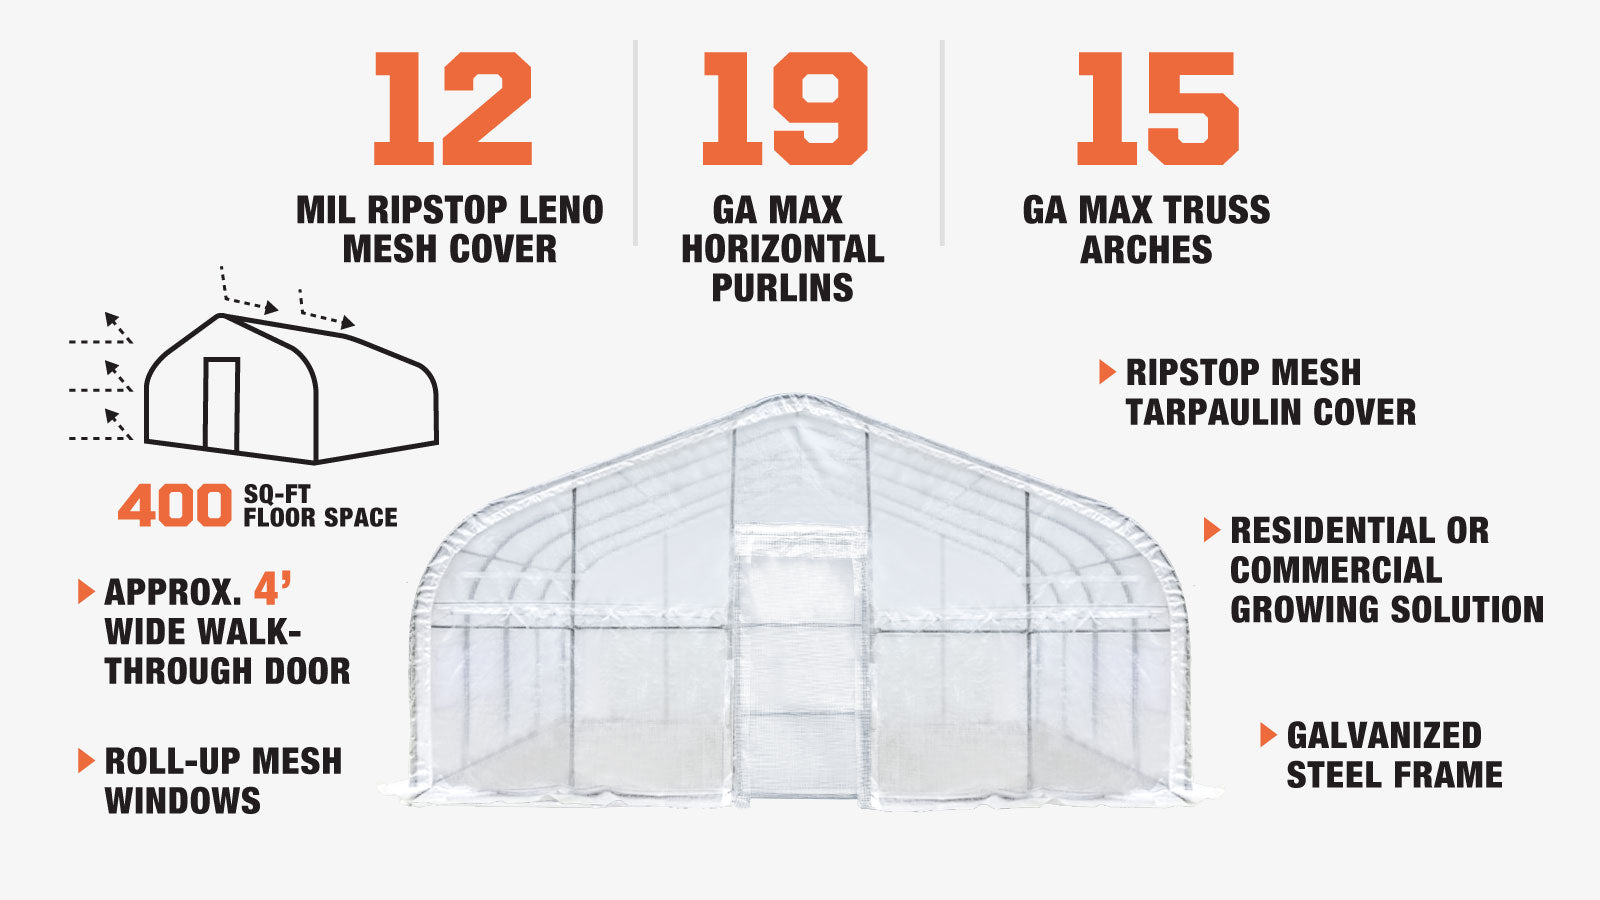 TMG Industrial 20’ x 20’ Tunnel Greenhouse Grow Tent w/12 Mil Ripstop Leno Mesh Cover, Cold Frame, Roll-up Windows, Peak Ceiling Roof, TMG-GH2020-description-image